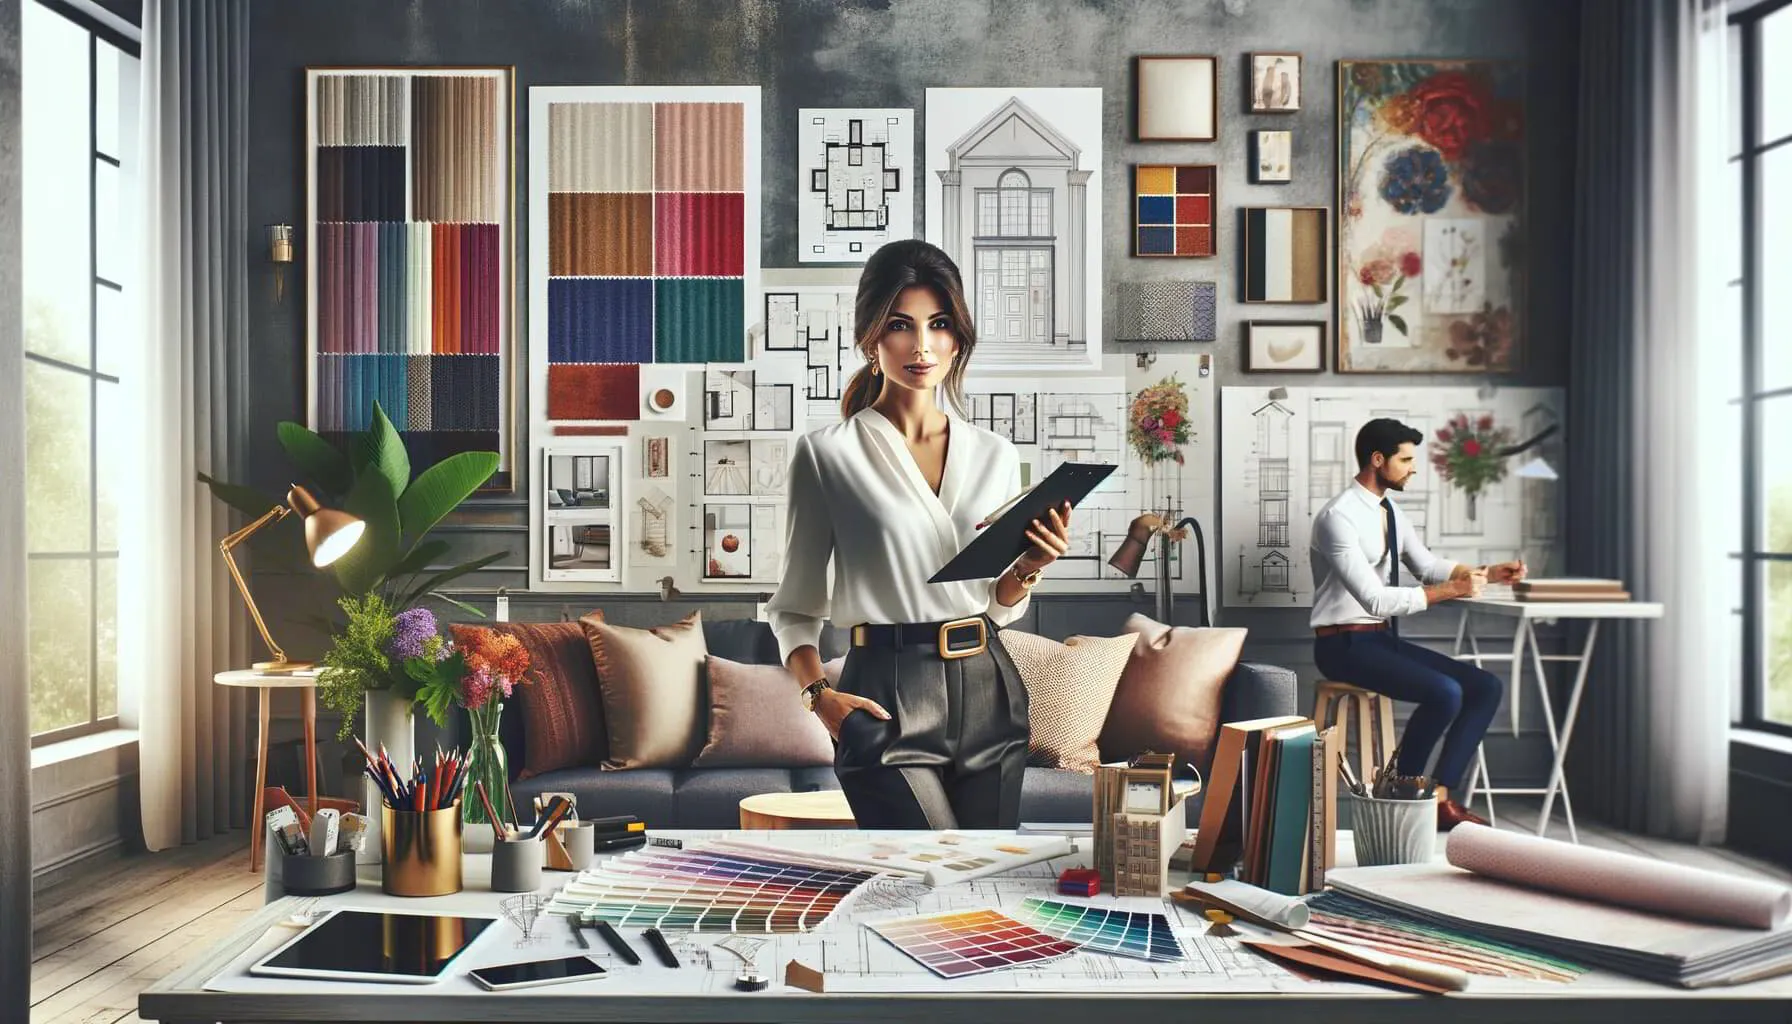 A professional and stylish woman, embodying the role of an interior designer, stands prominently in her workspace